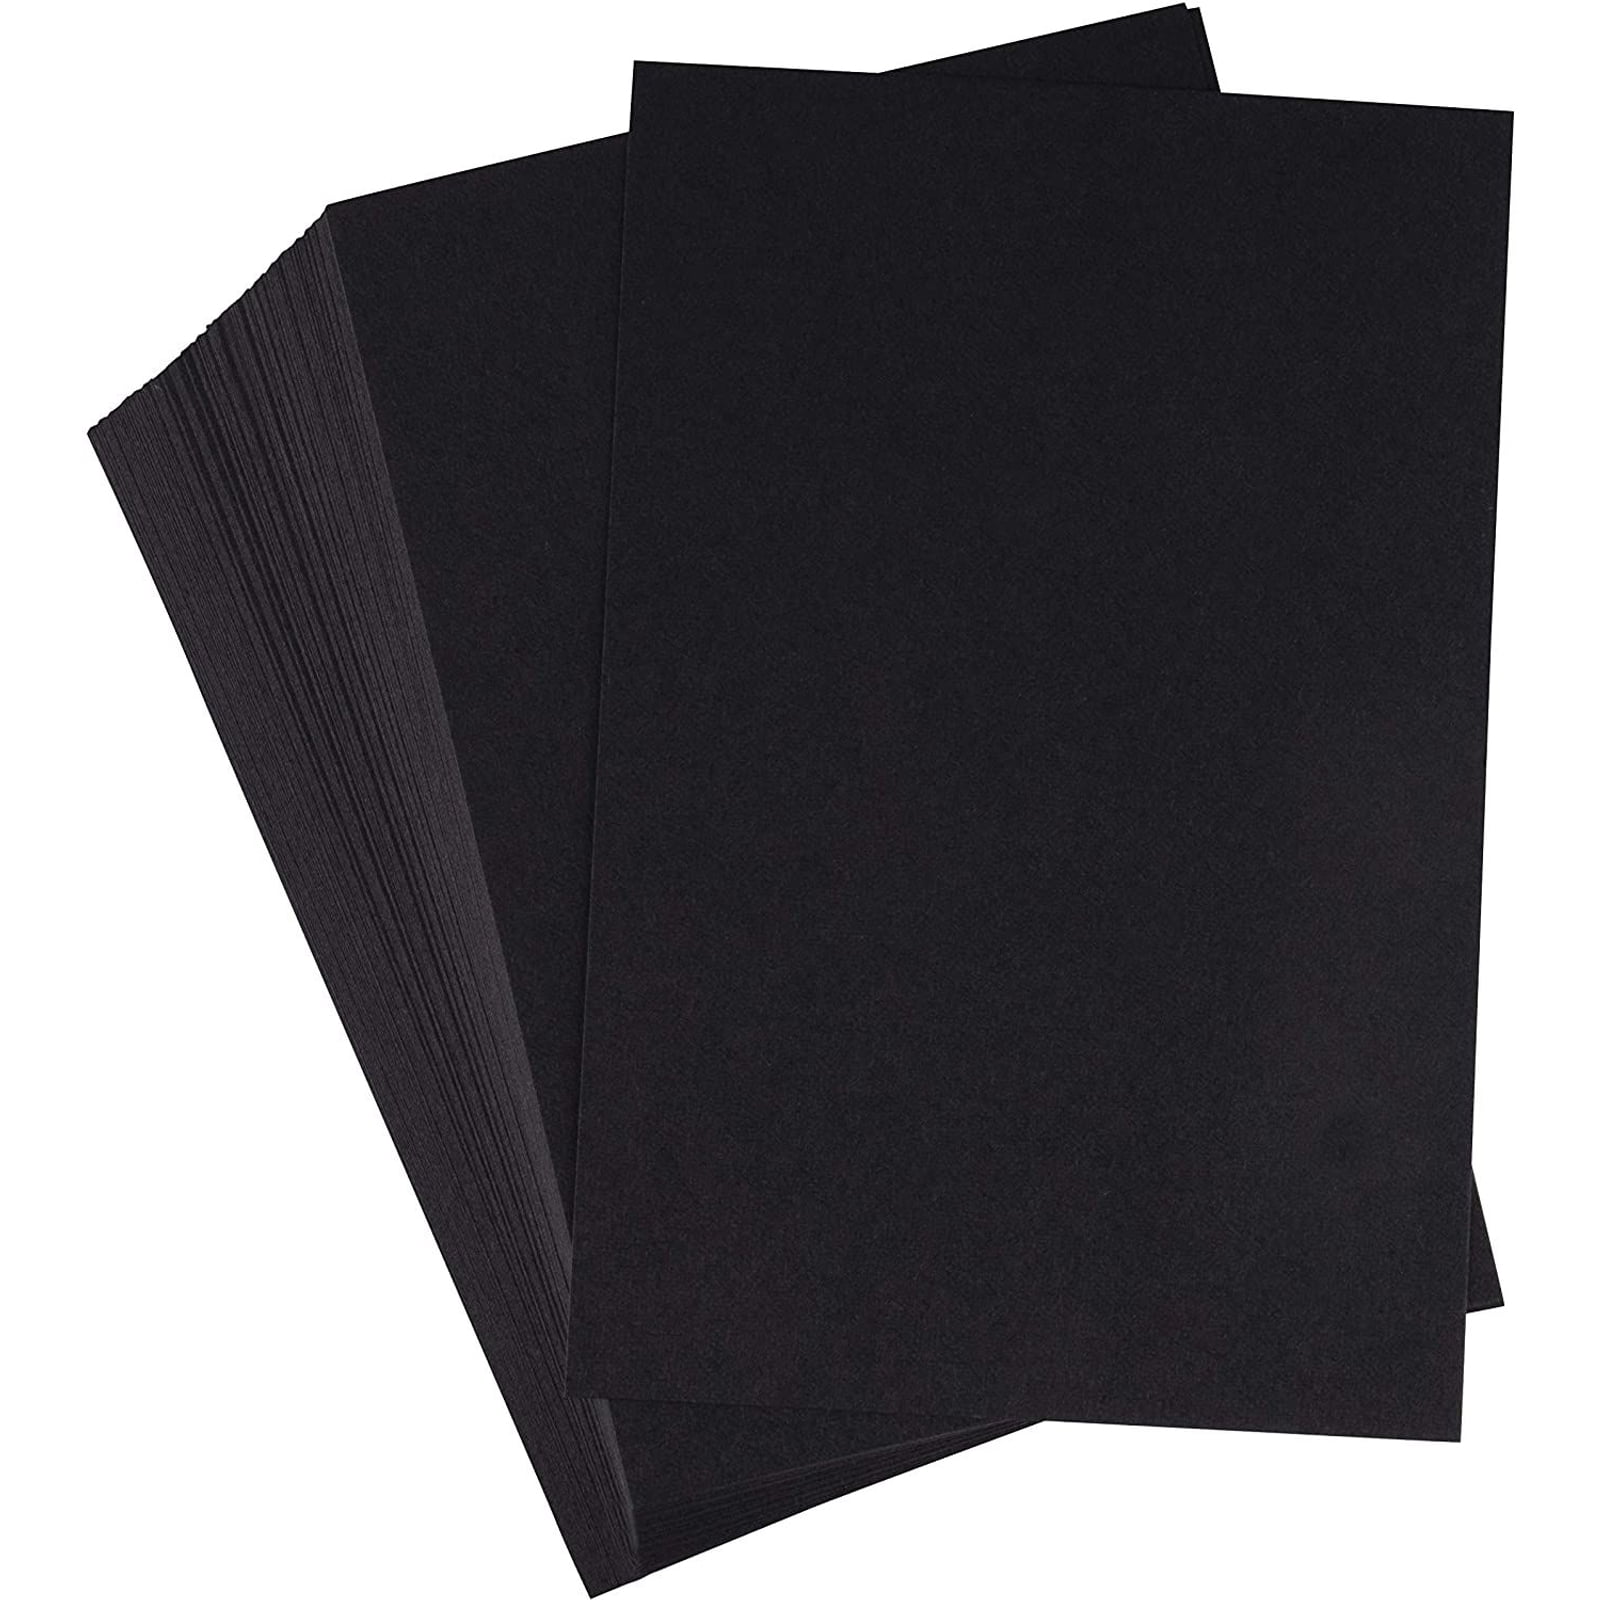 Black Card Stock Paper: All Sizes, Premium Papers & Textures